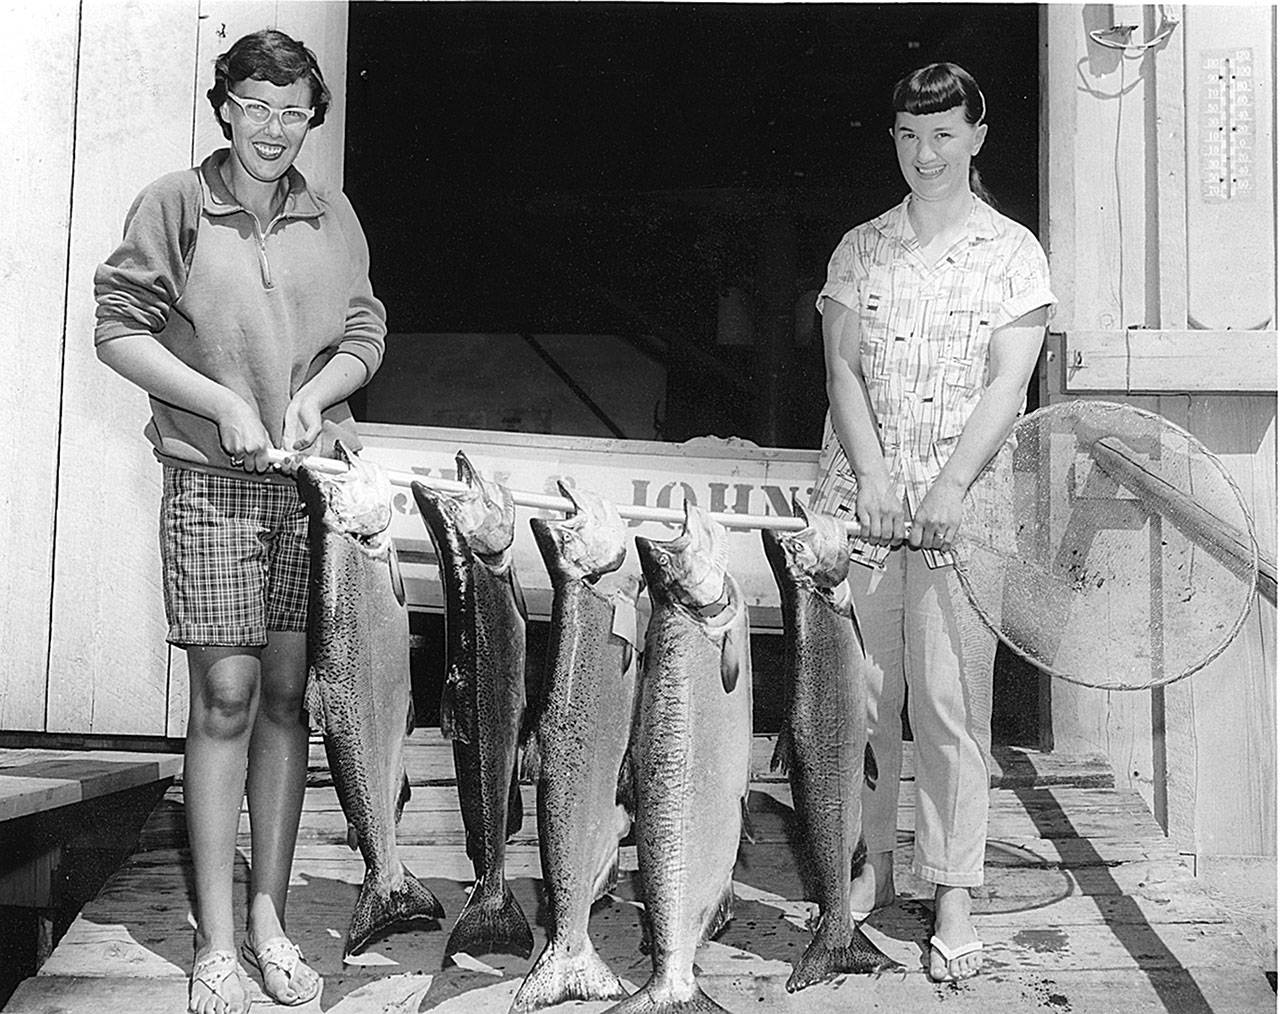 Jeannette Copper and Elizabeth Johnson show off the salmon catch at Jim and John’s Resort. Photo provided